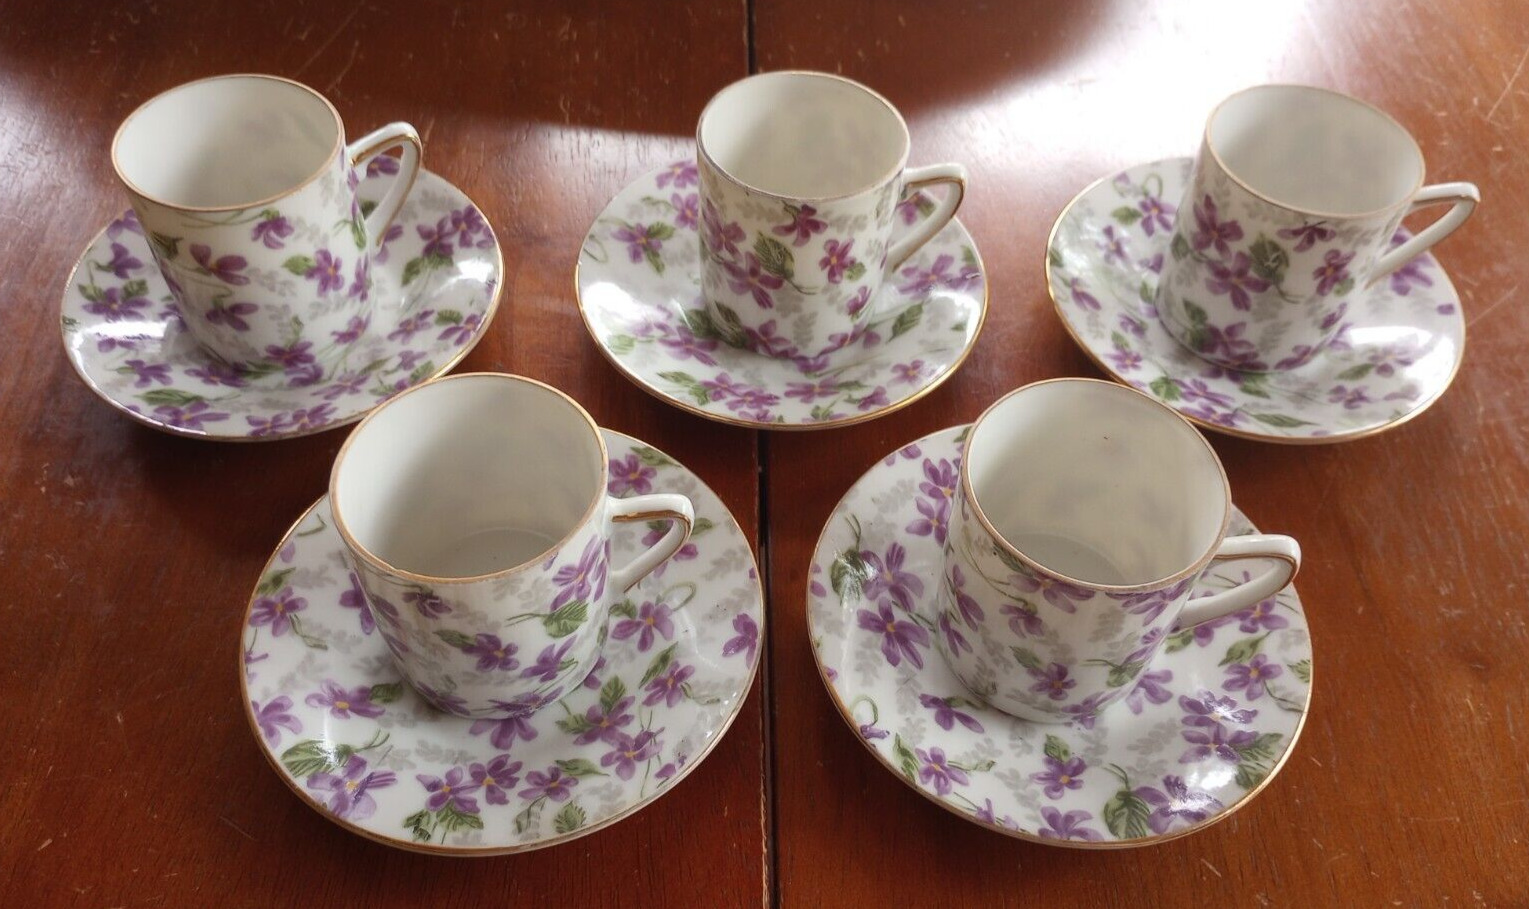 Vintage Inarco Japanese Demitasse Tea Set for 5 (E-5872) - Small Cups w/ Saucers